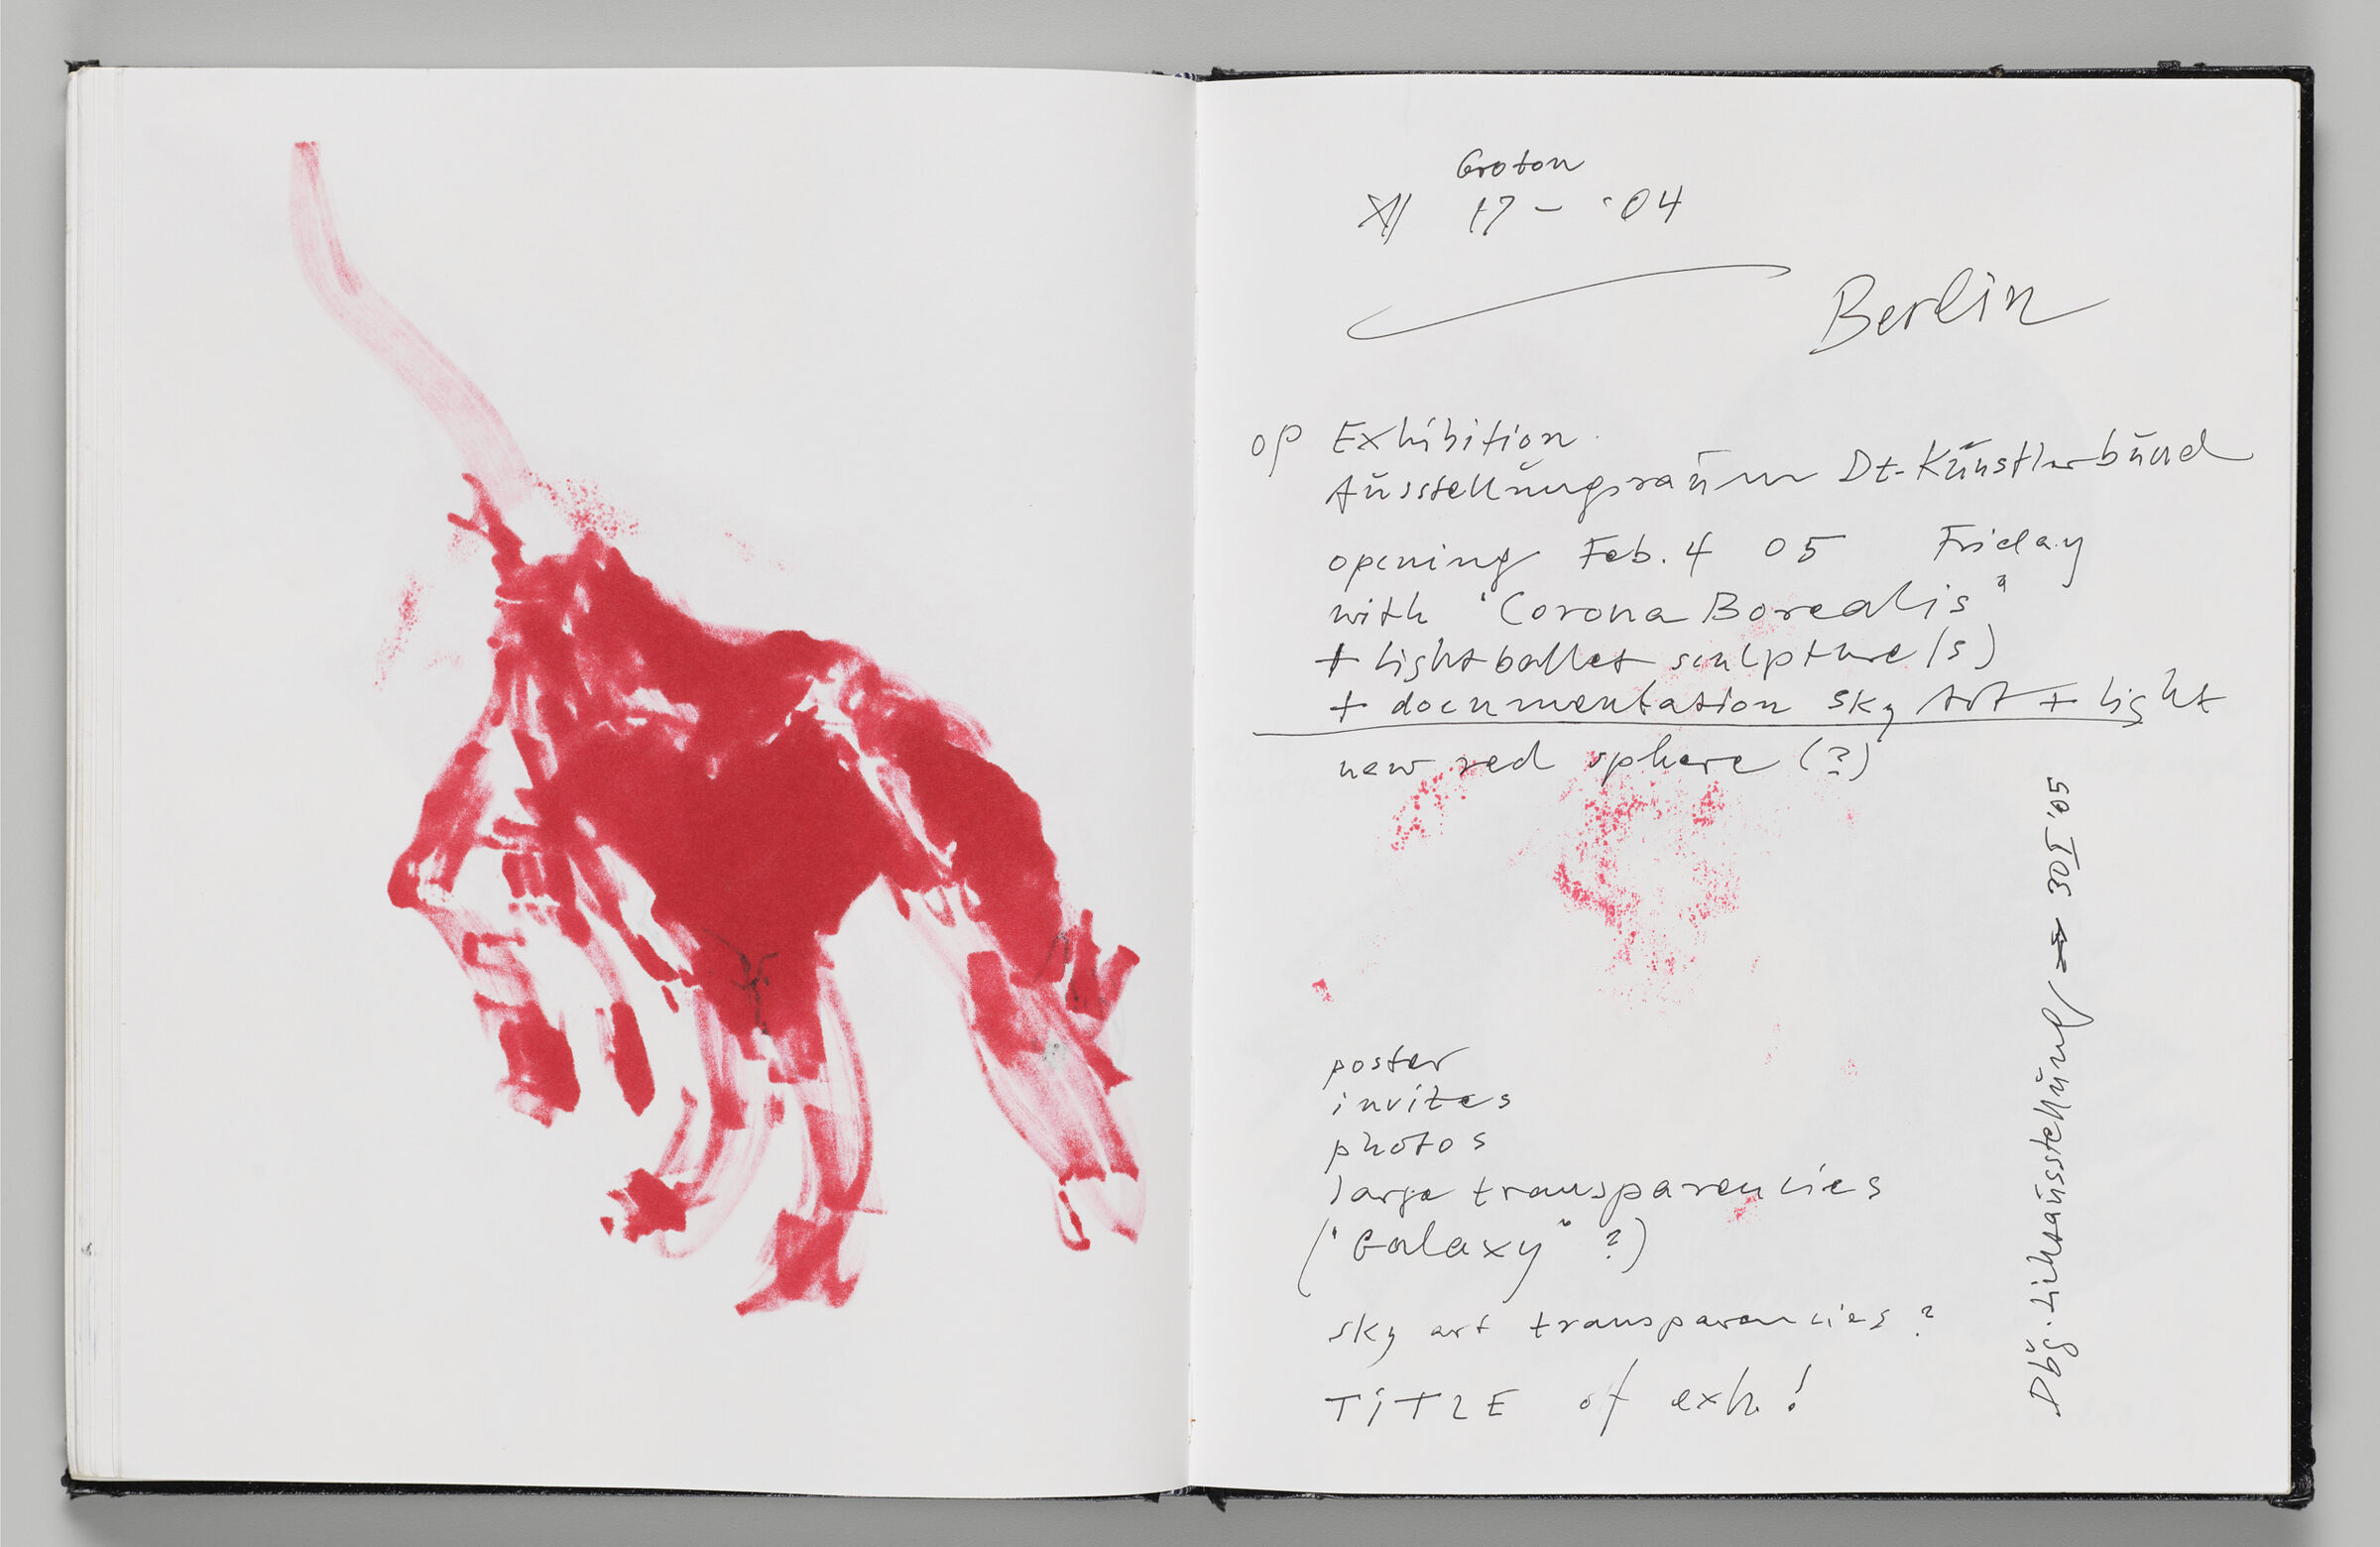 Untitled (Bleed-Through Of Previous Page, Left Page); Untitled (Notes On Berlin Exhibition And Color Tranfer, Right Page)